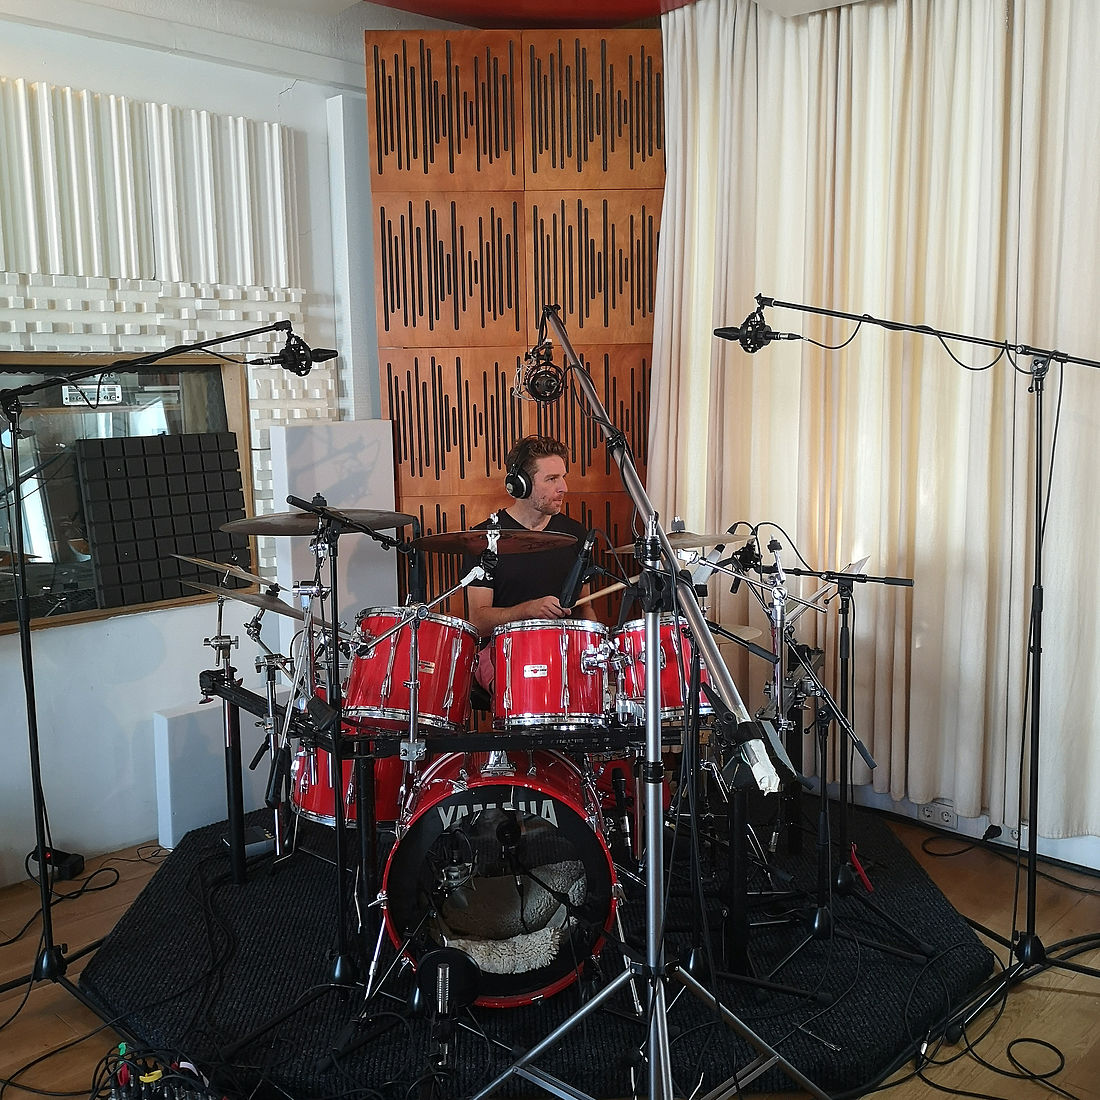 [Translate to Englich:] Steve_Aho_Drum_Recording